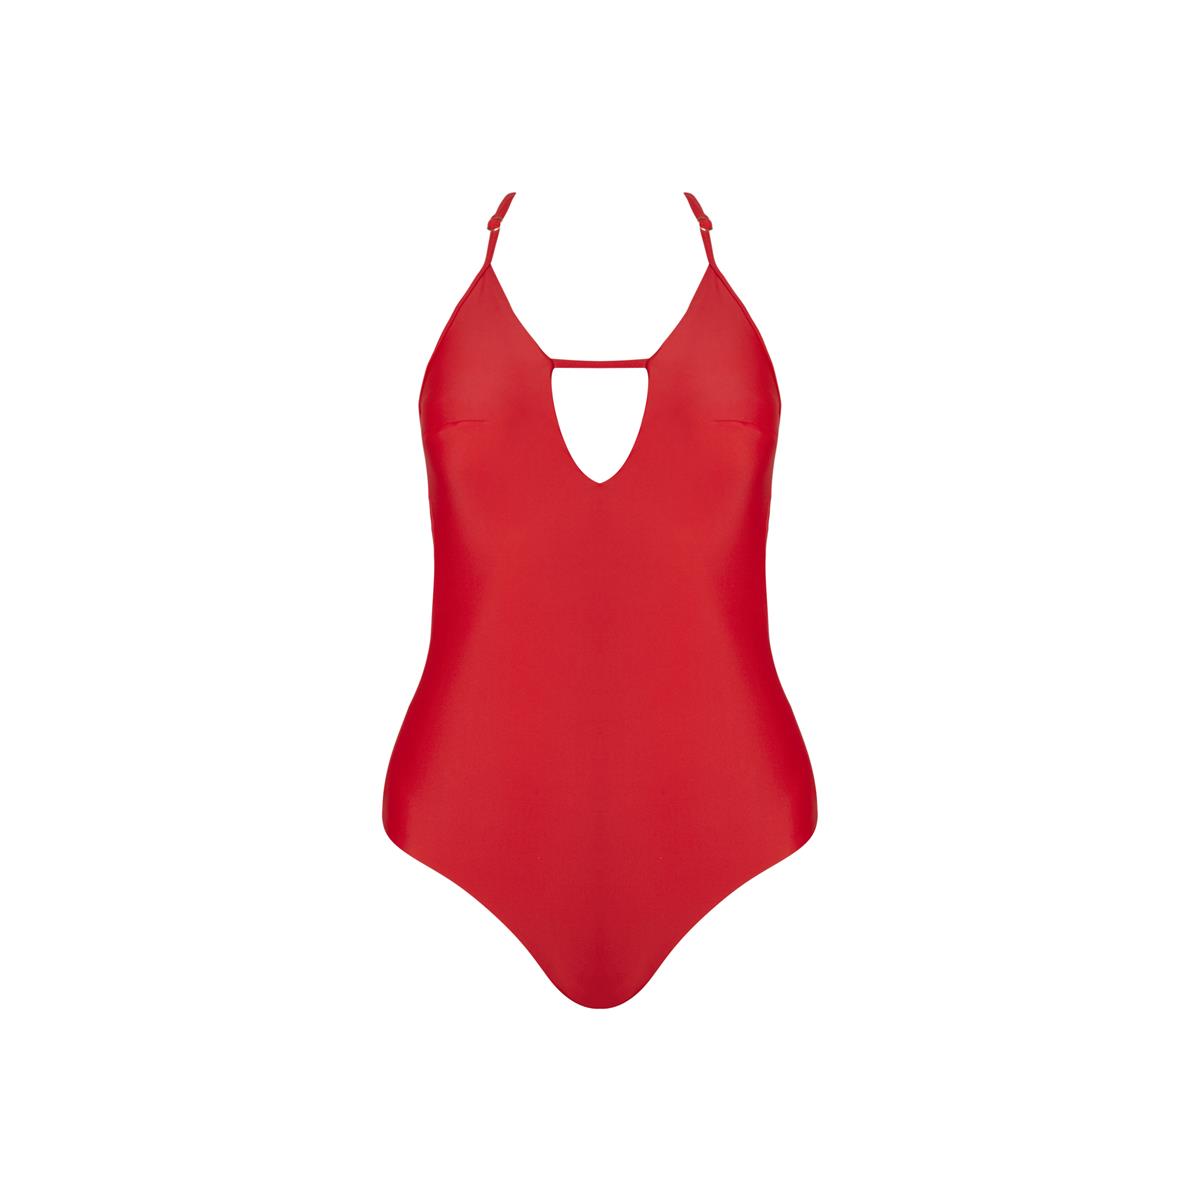 MARGARET AND HERMIONE_SS18_Swimsuit No.2_red_EUR 154,00